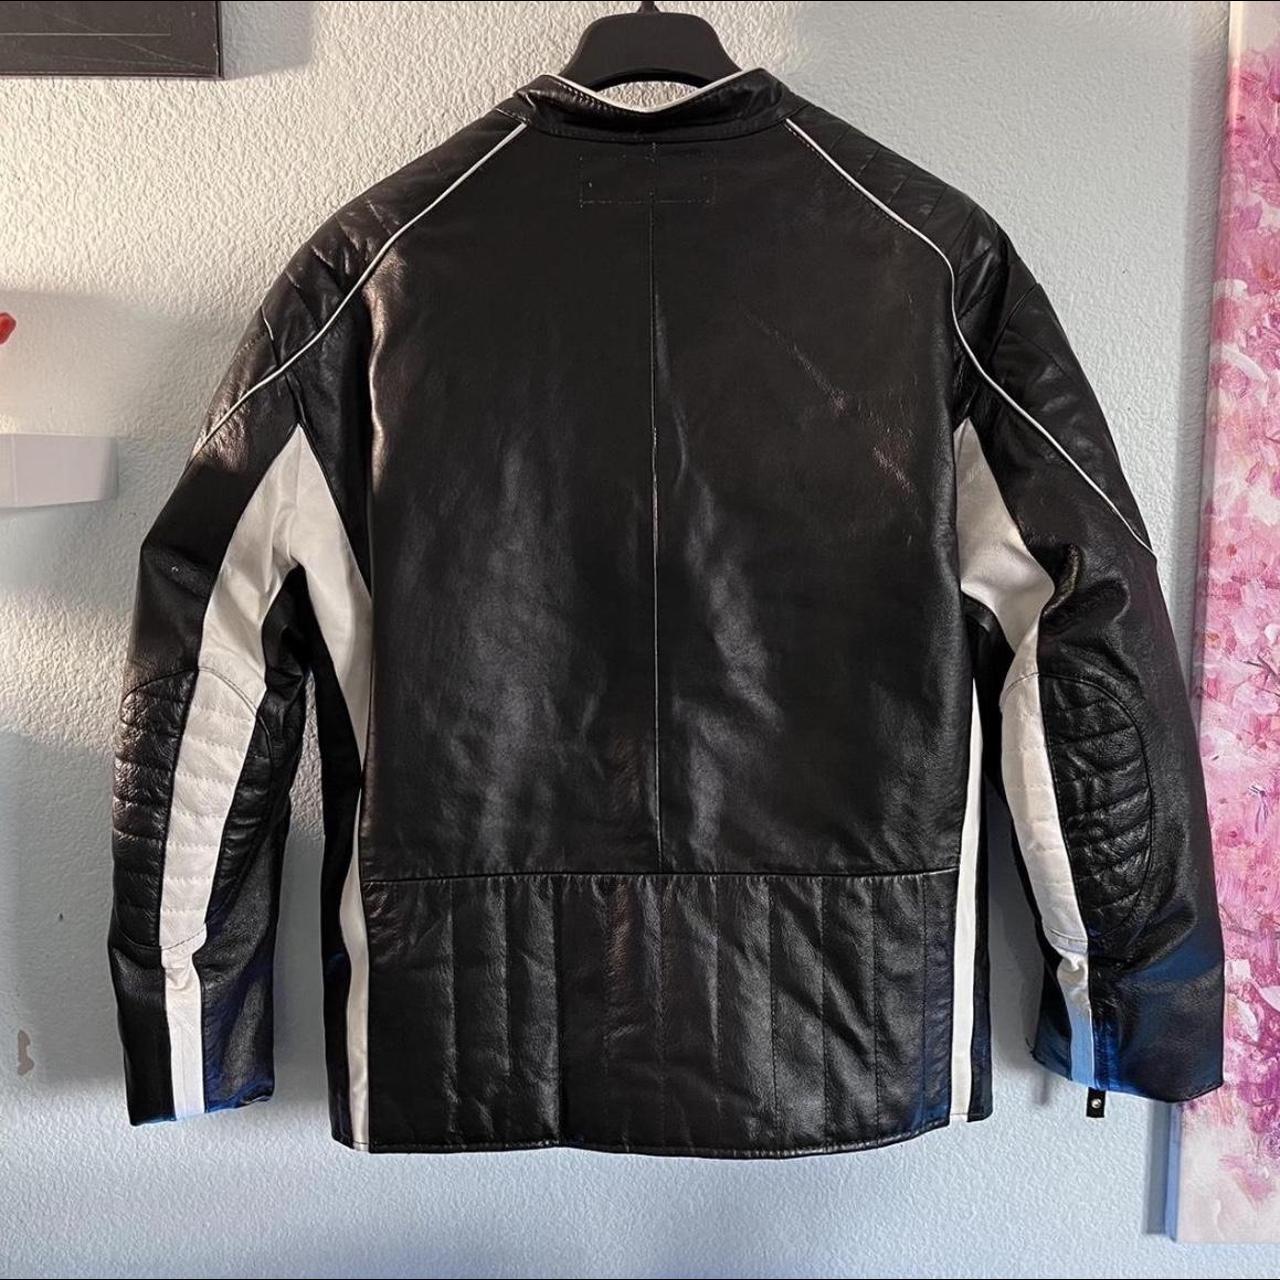 Wilson’s Leather Men's Black and White Jacket (2)